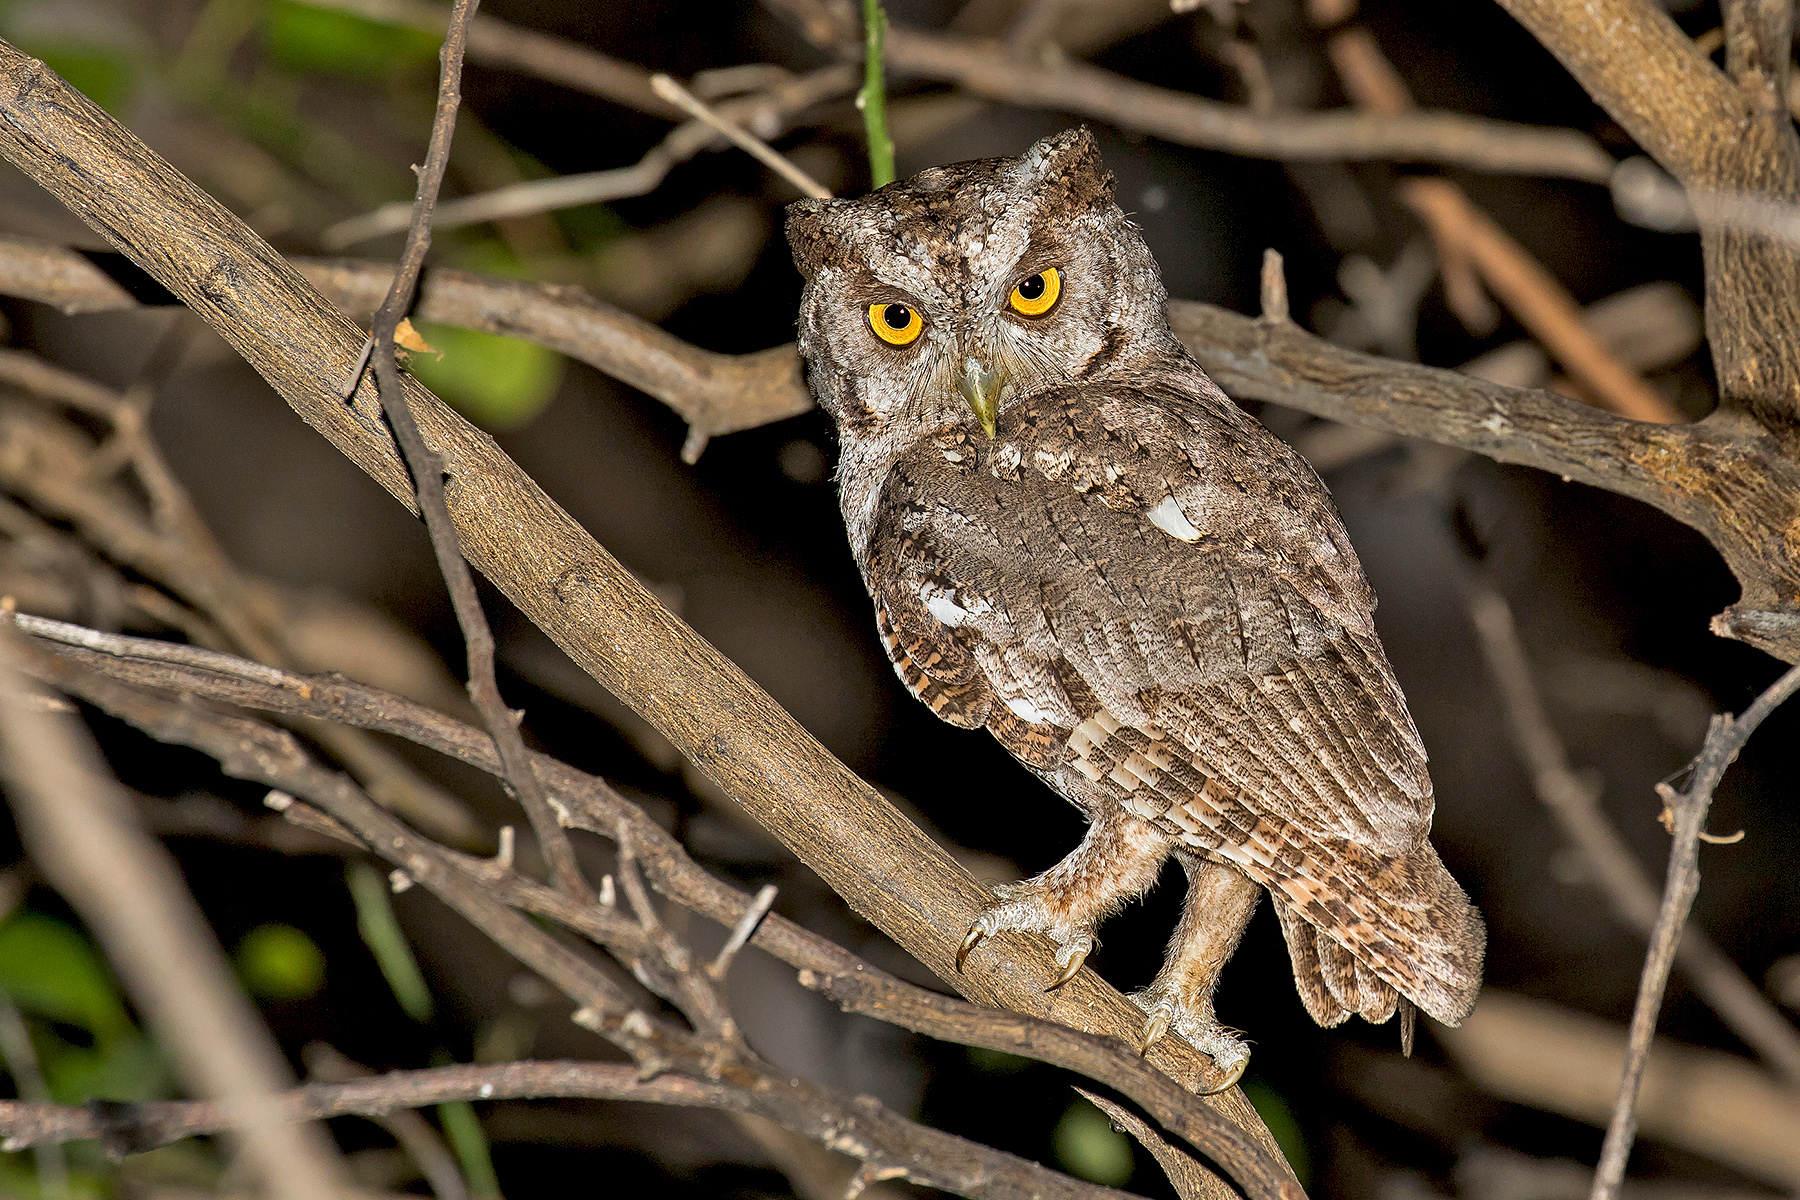 Pacific Screech Owl on our Costa Rica birding tour (image by Pete Morris)